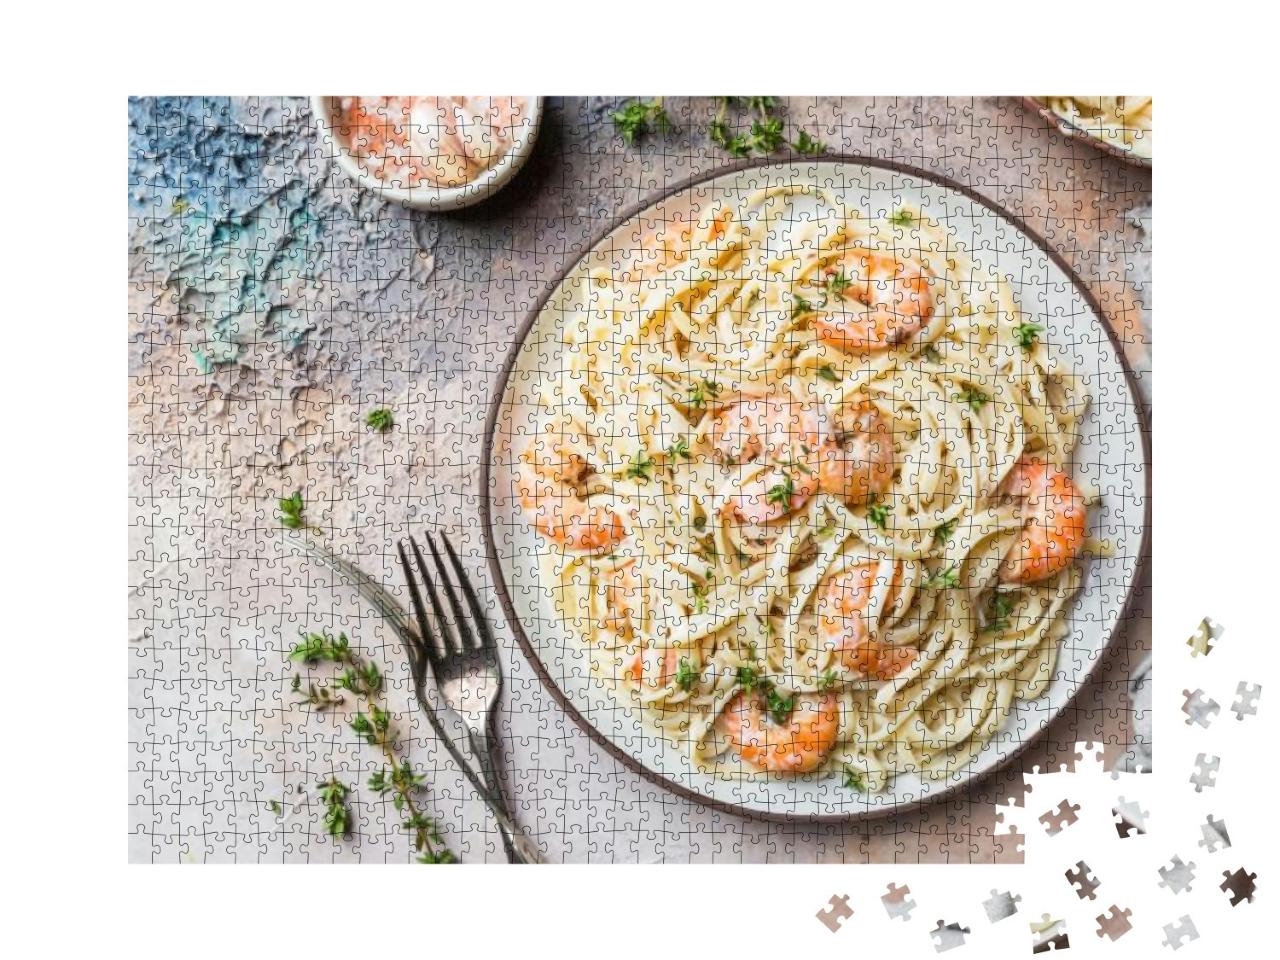 Italian Pasta Fettuccine in a Creamy Sauce with Shrimp on... Jigsaw Puzzle with 1000 pieces